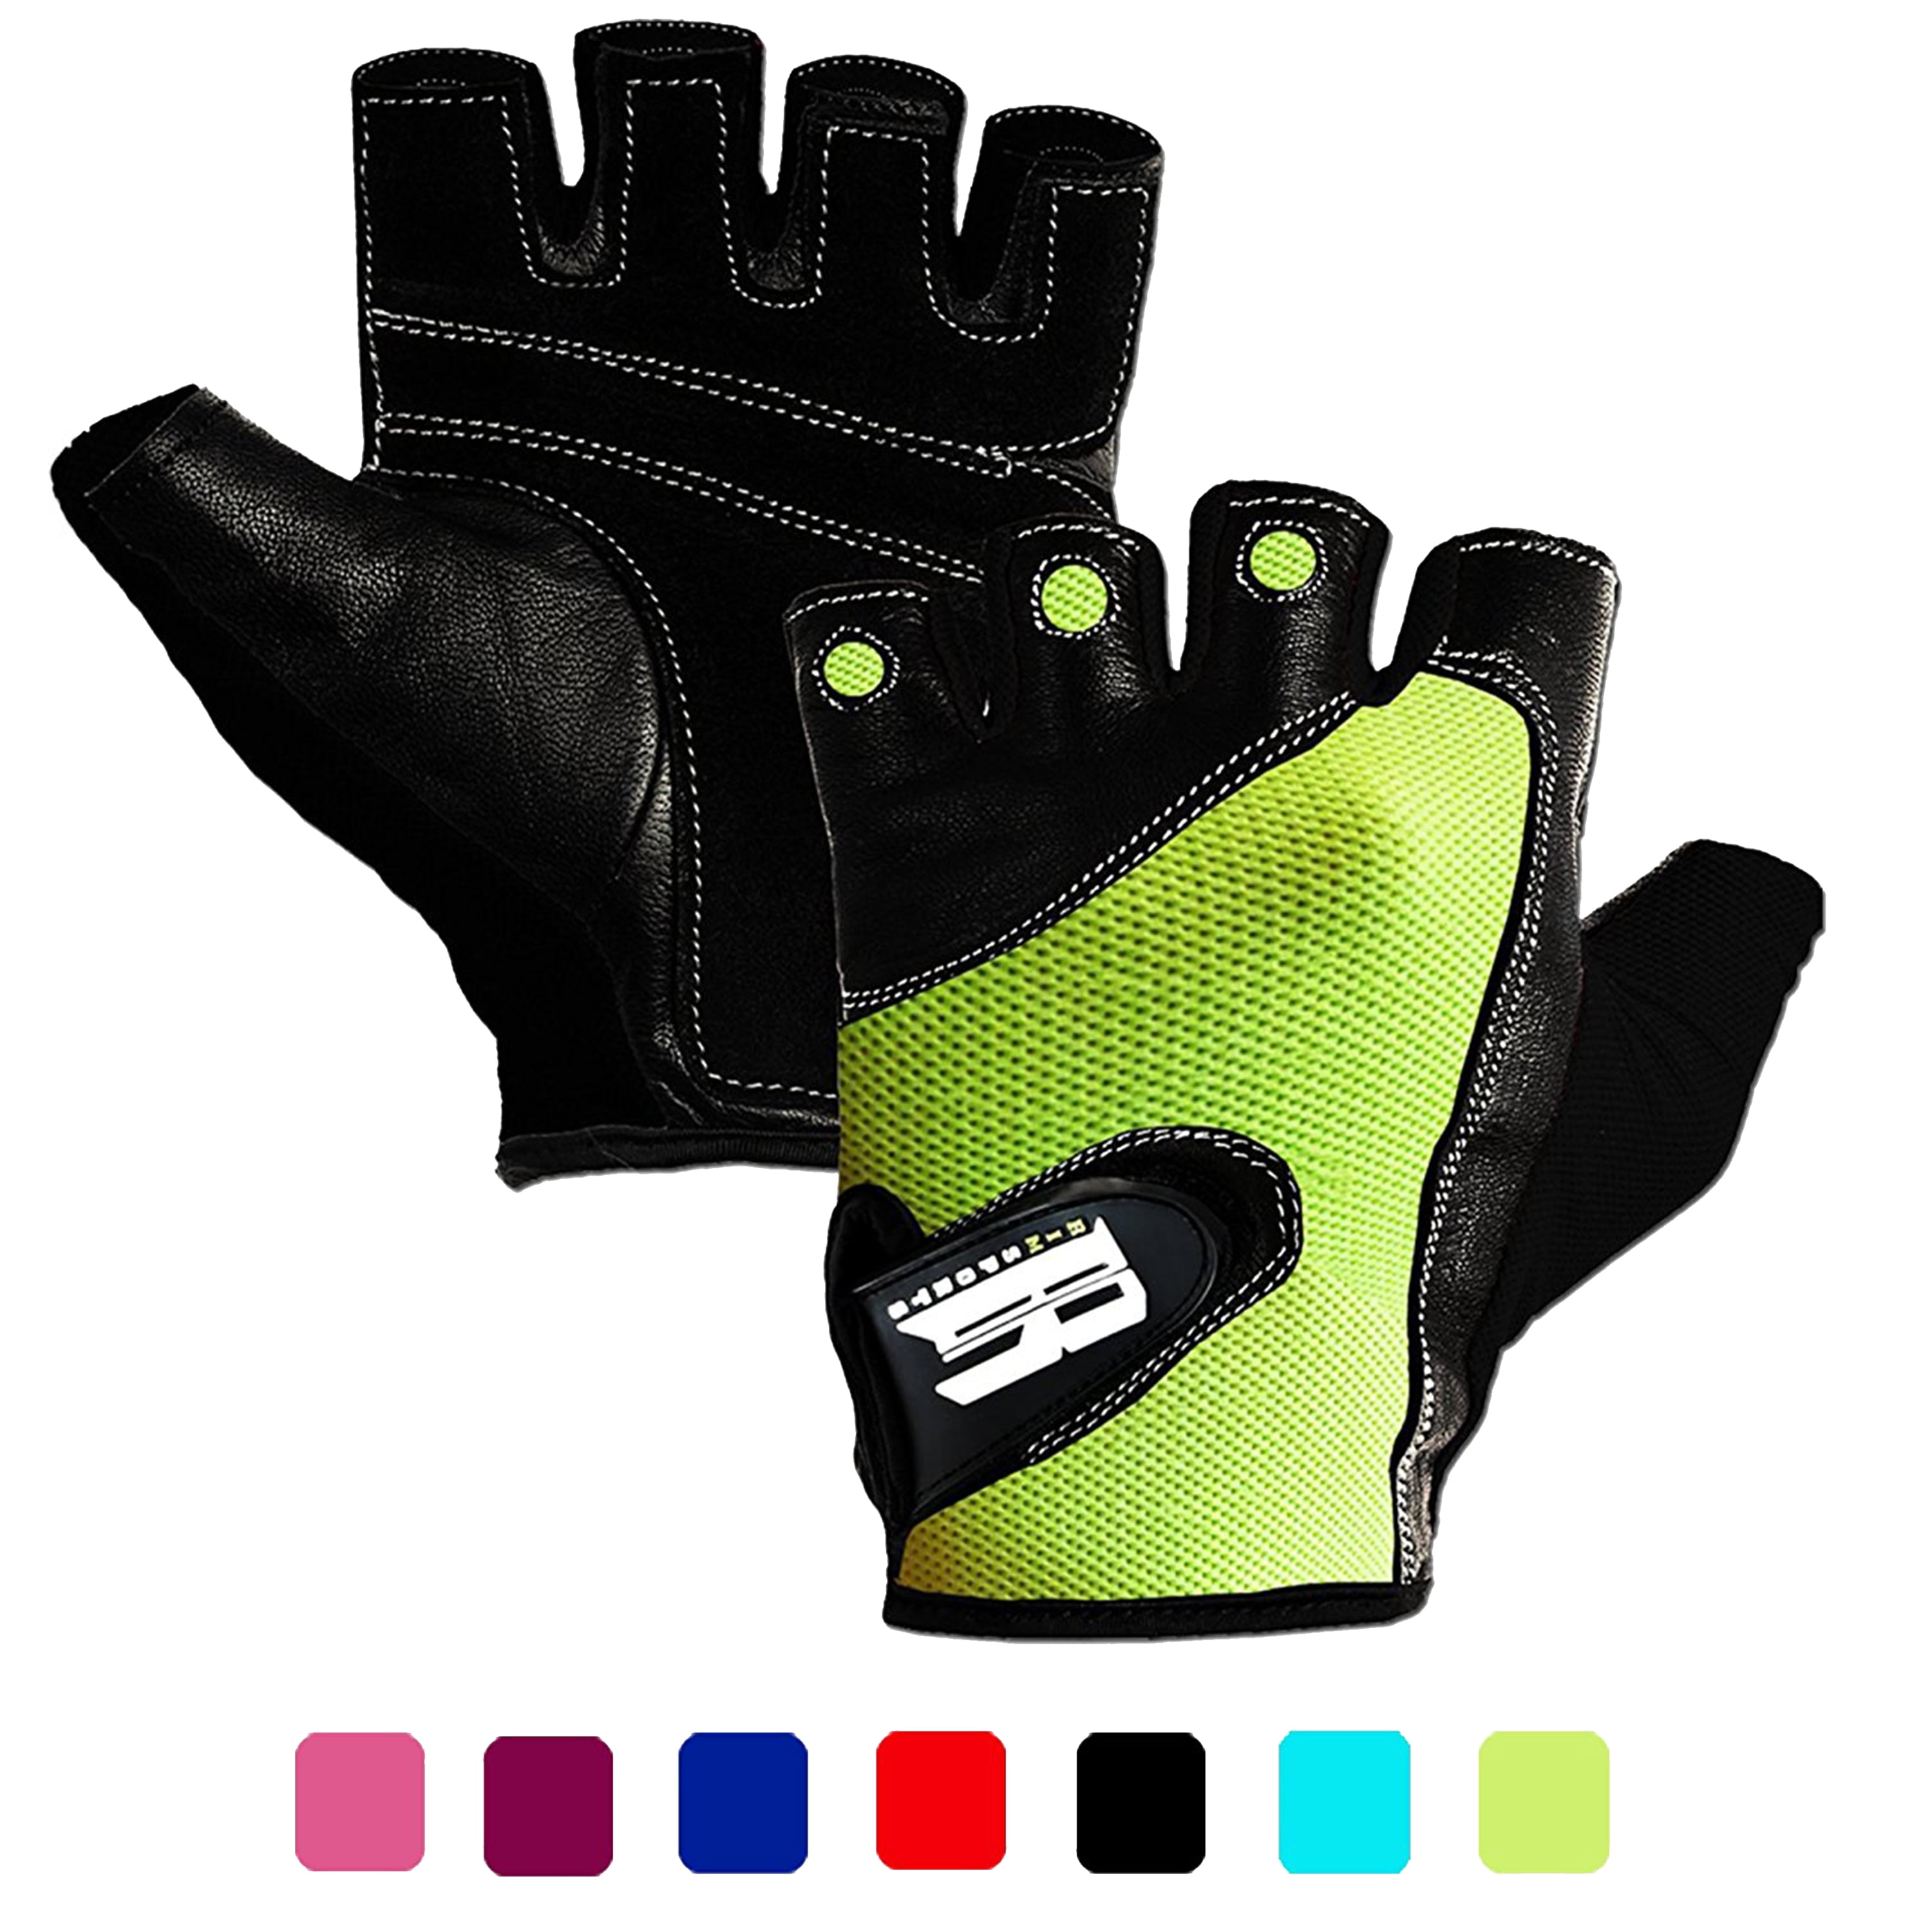 FITNESS  PADDED GYM WEIGHT LIFTING TRAINING  CYCLING BIKE WHEELCHAIR GLOVES 